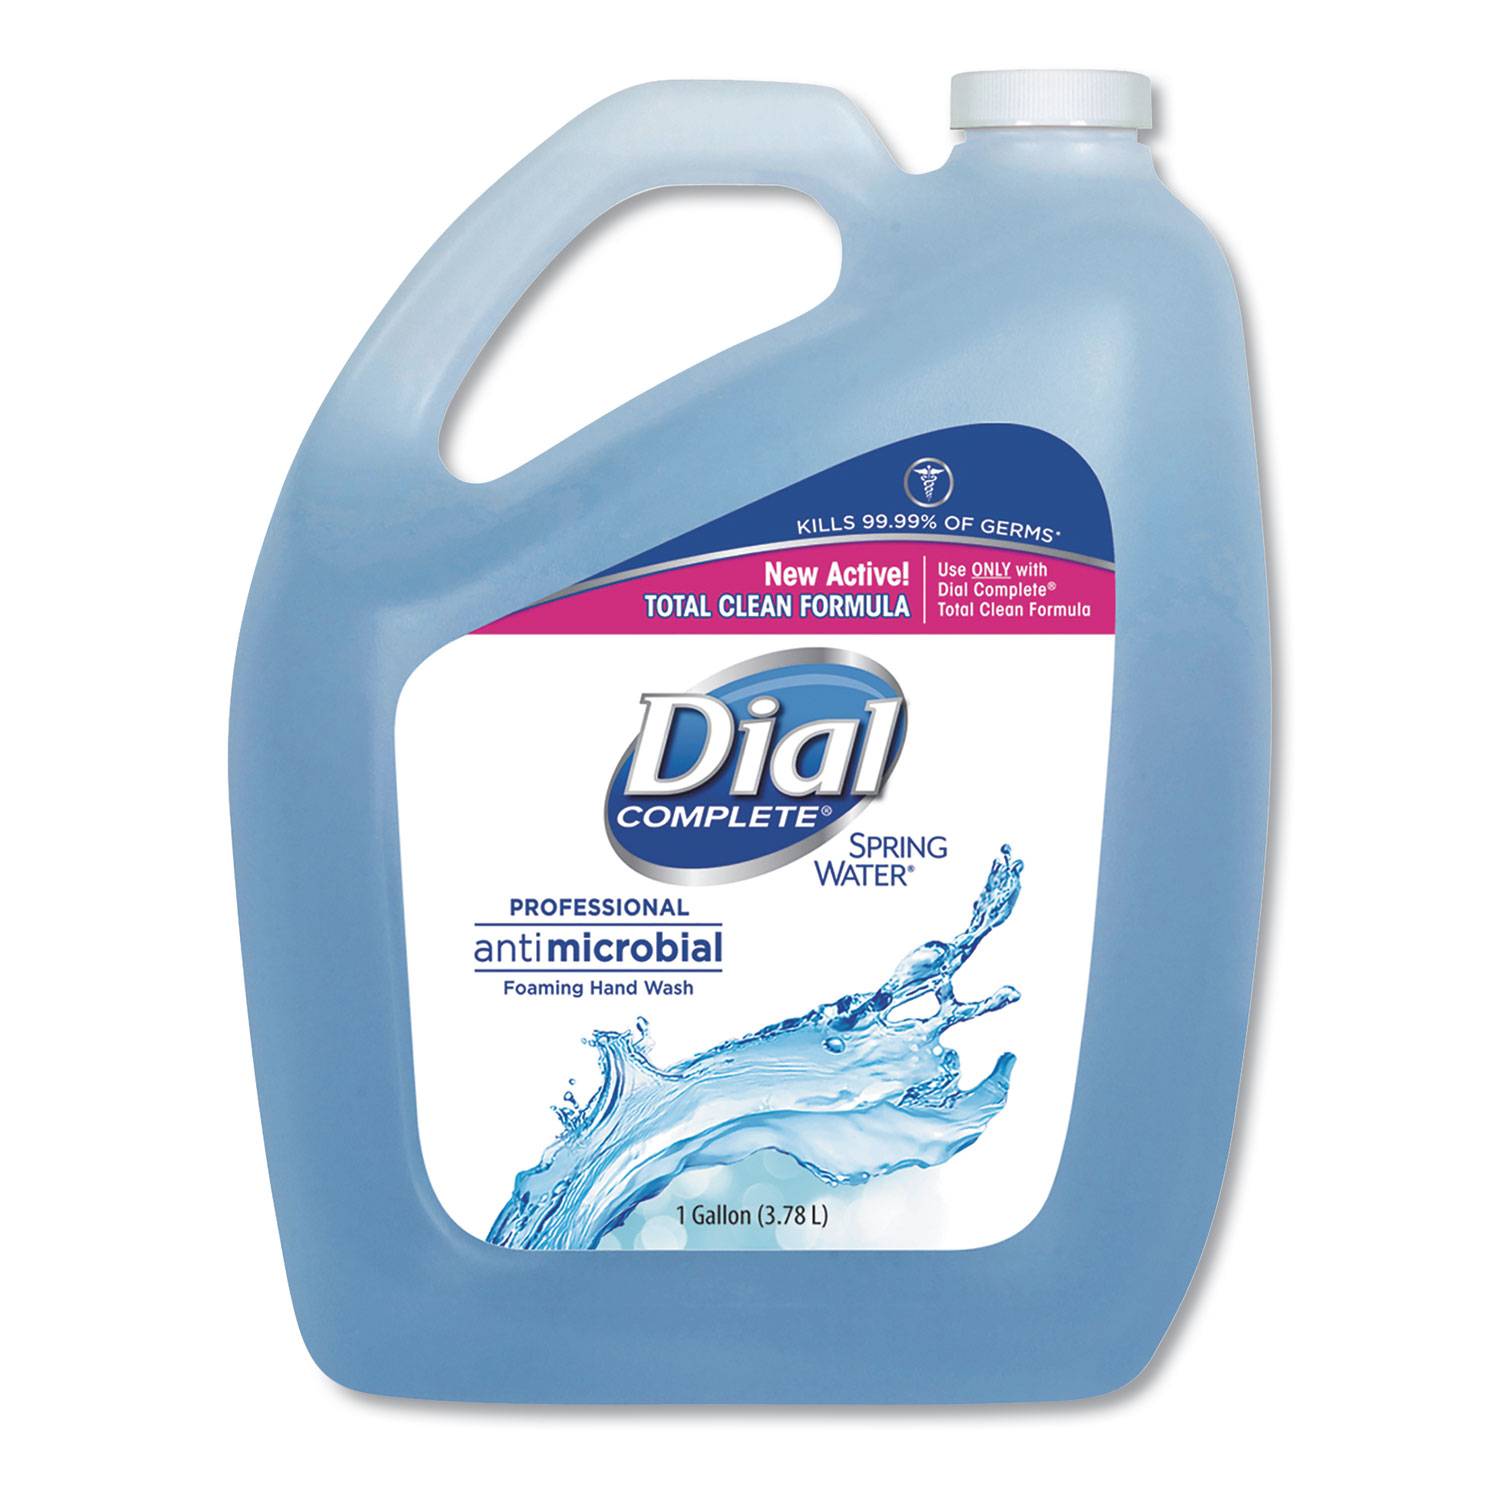  Dial Professional DIA15922 Antimicrobial Foaming Hand Wash, Spring Water, 1 gal Bottle, 4/Carton (DIA15922) 